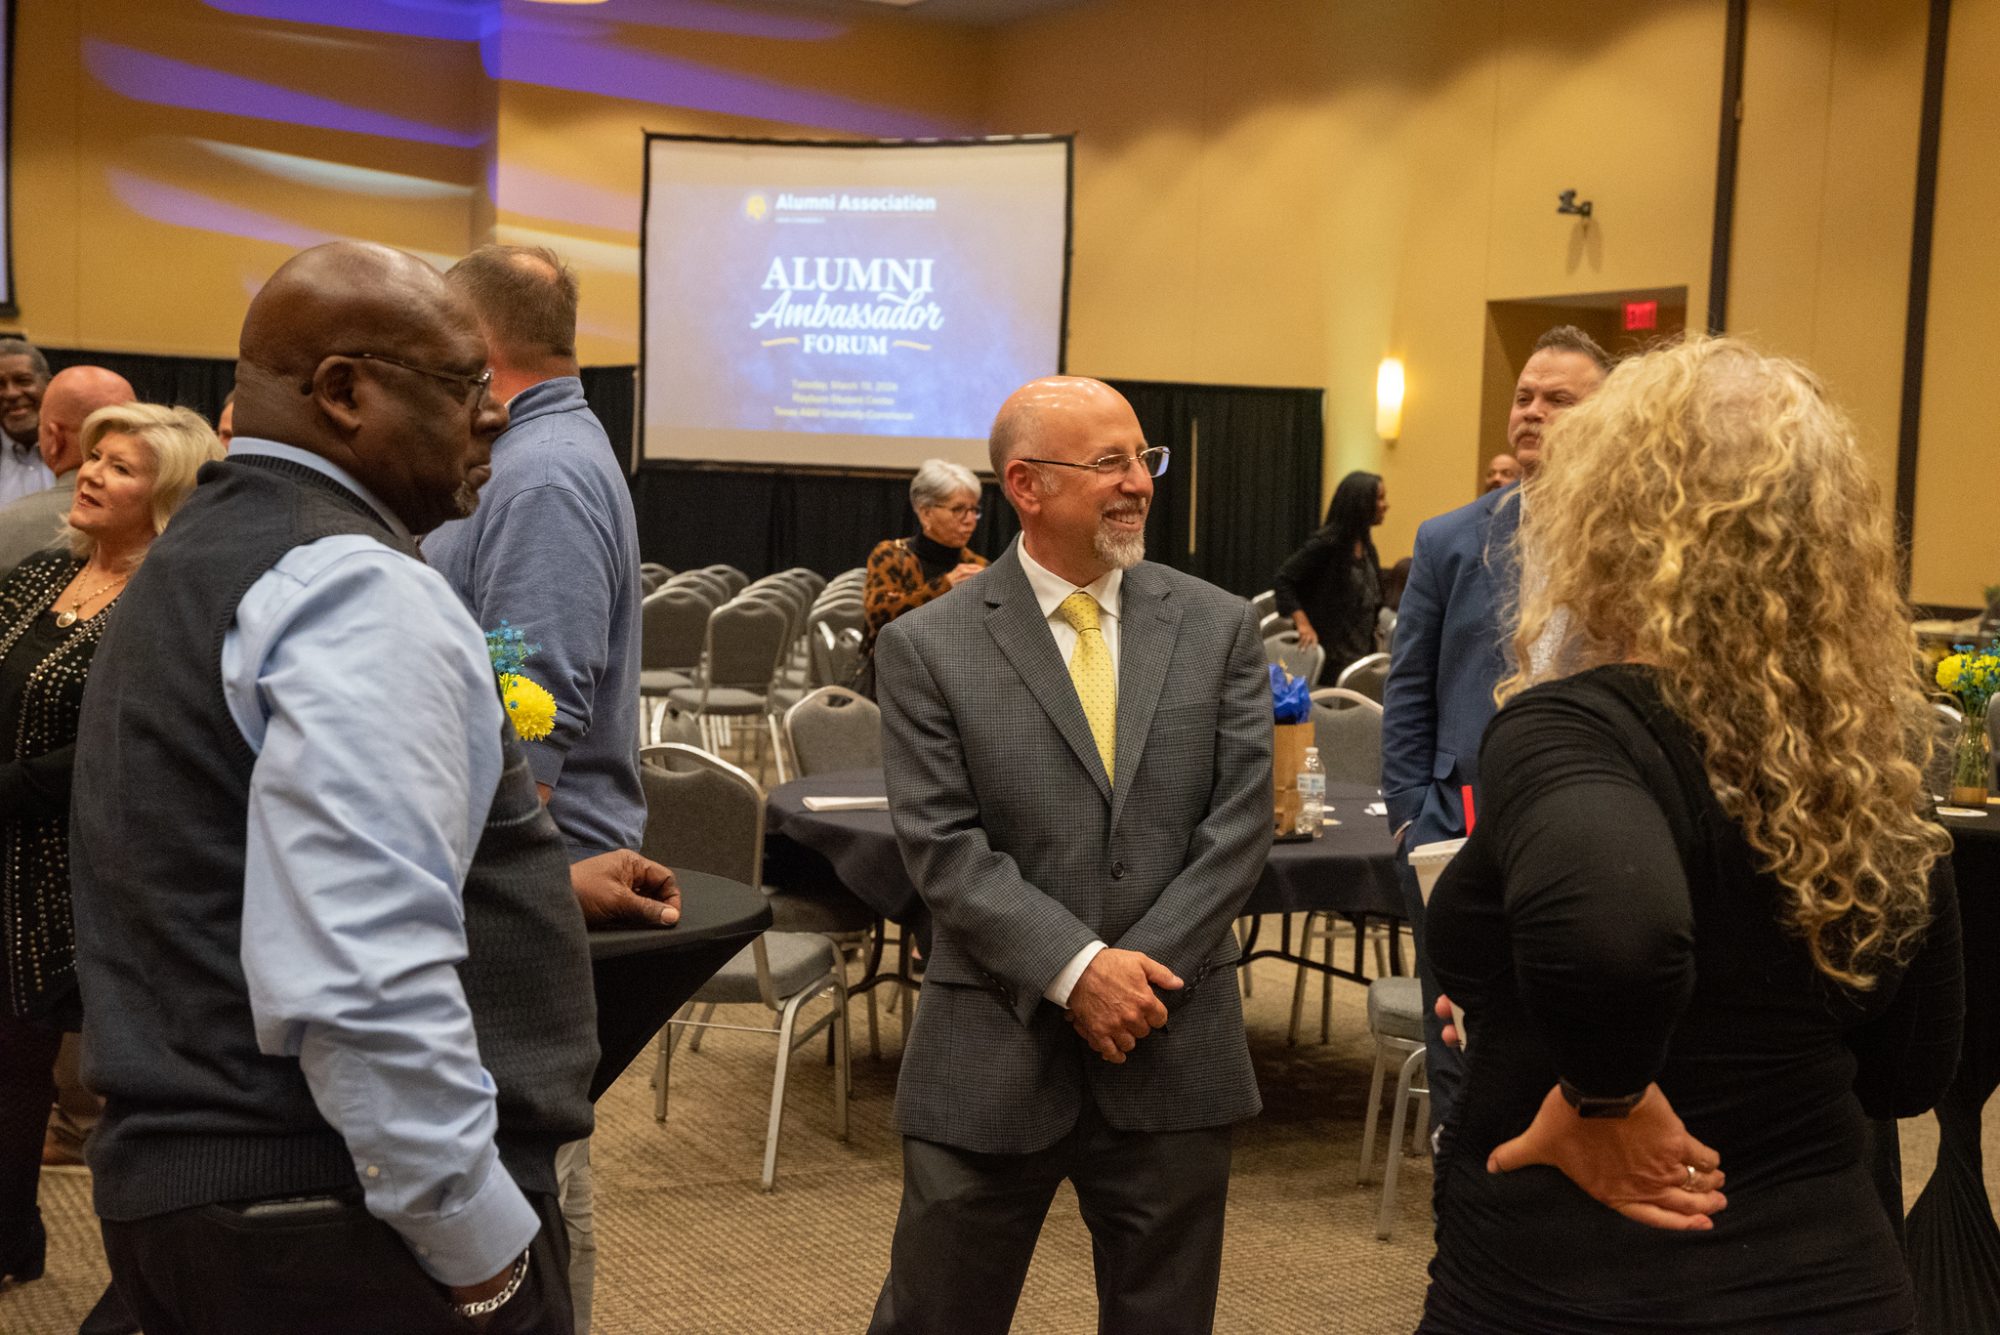 A circle of people smile and talk together at the Alumni Ambassador Forum.